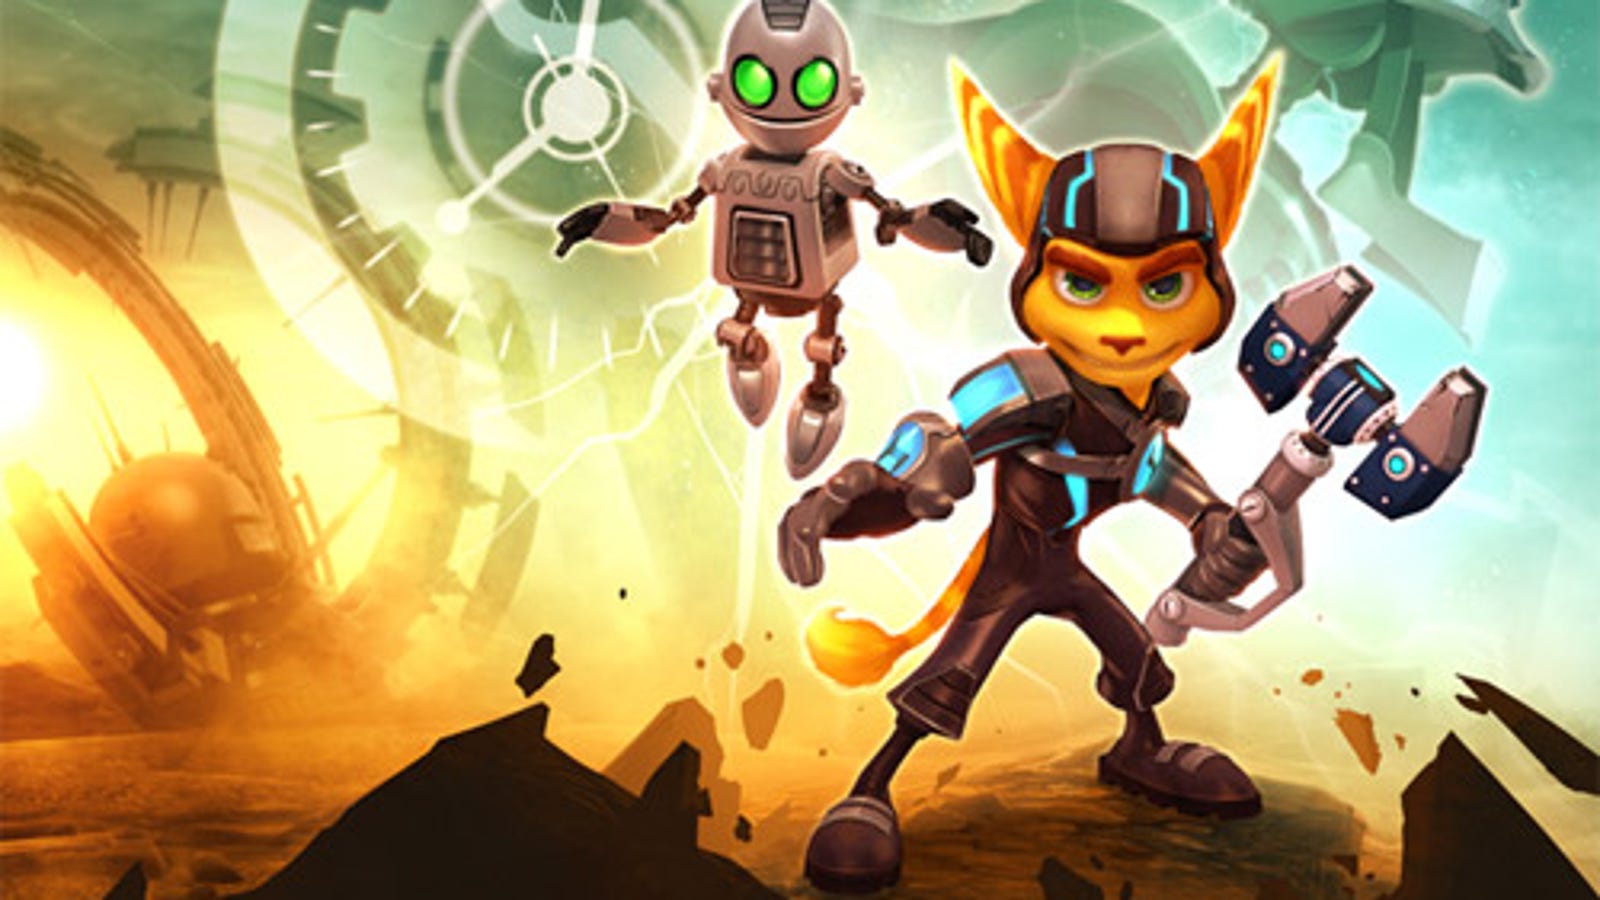 Frankenreview: Ratchet & Clank: A Crack In Time